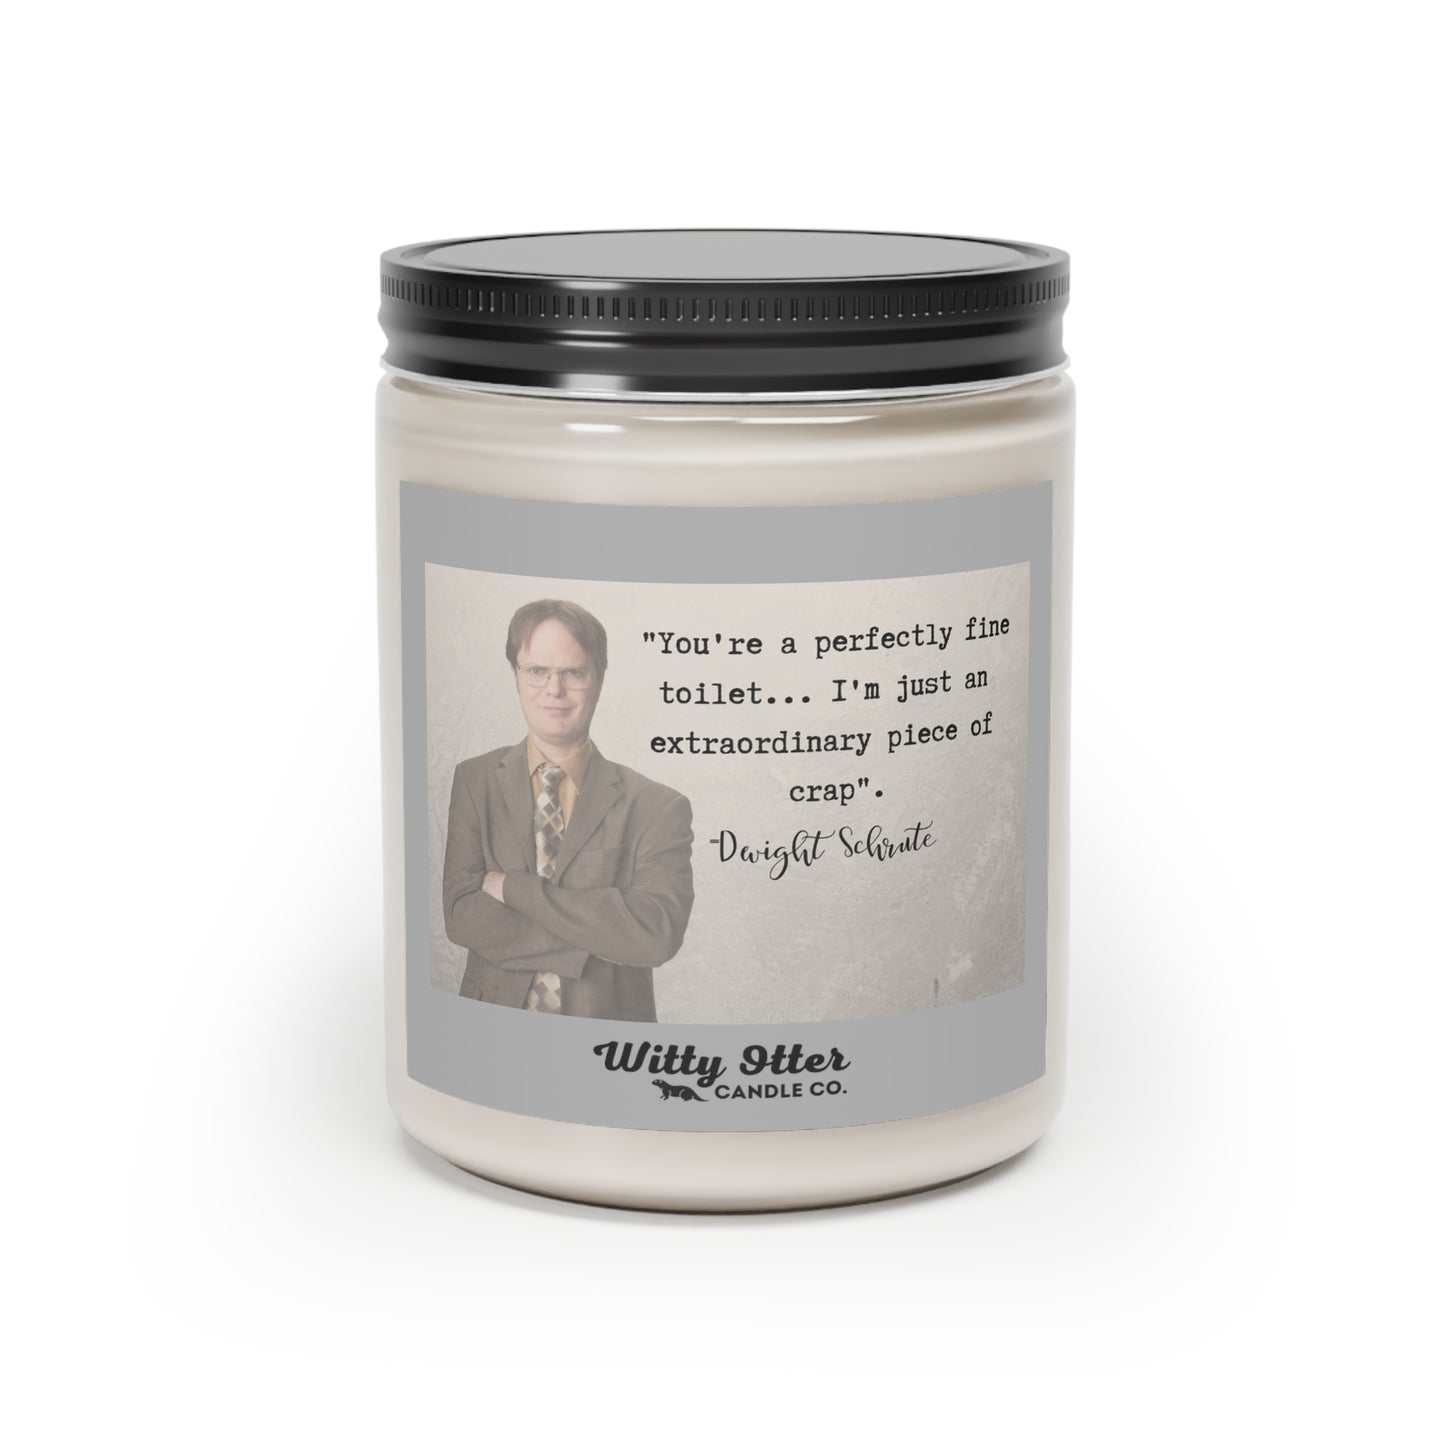 the Office "Toilet" quote 9oz soy candle | Dwight Schrute candle